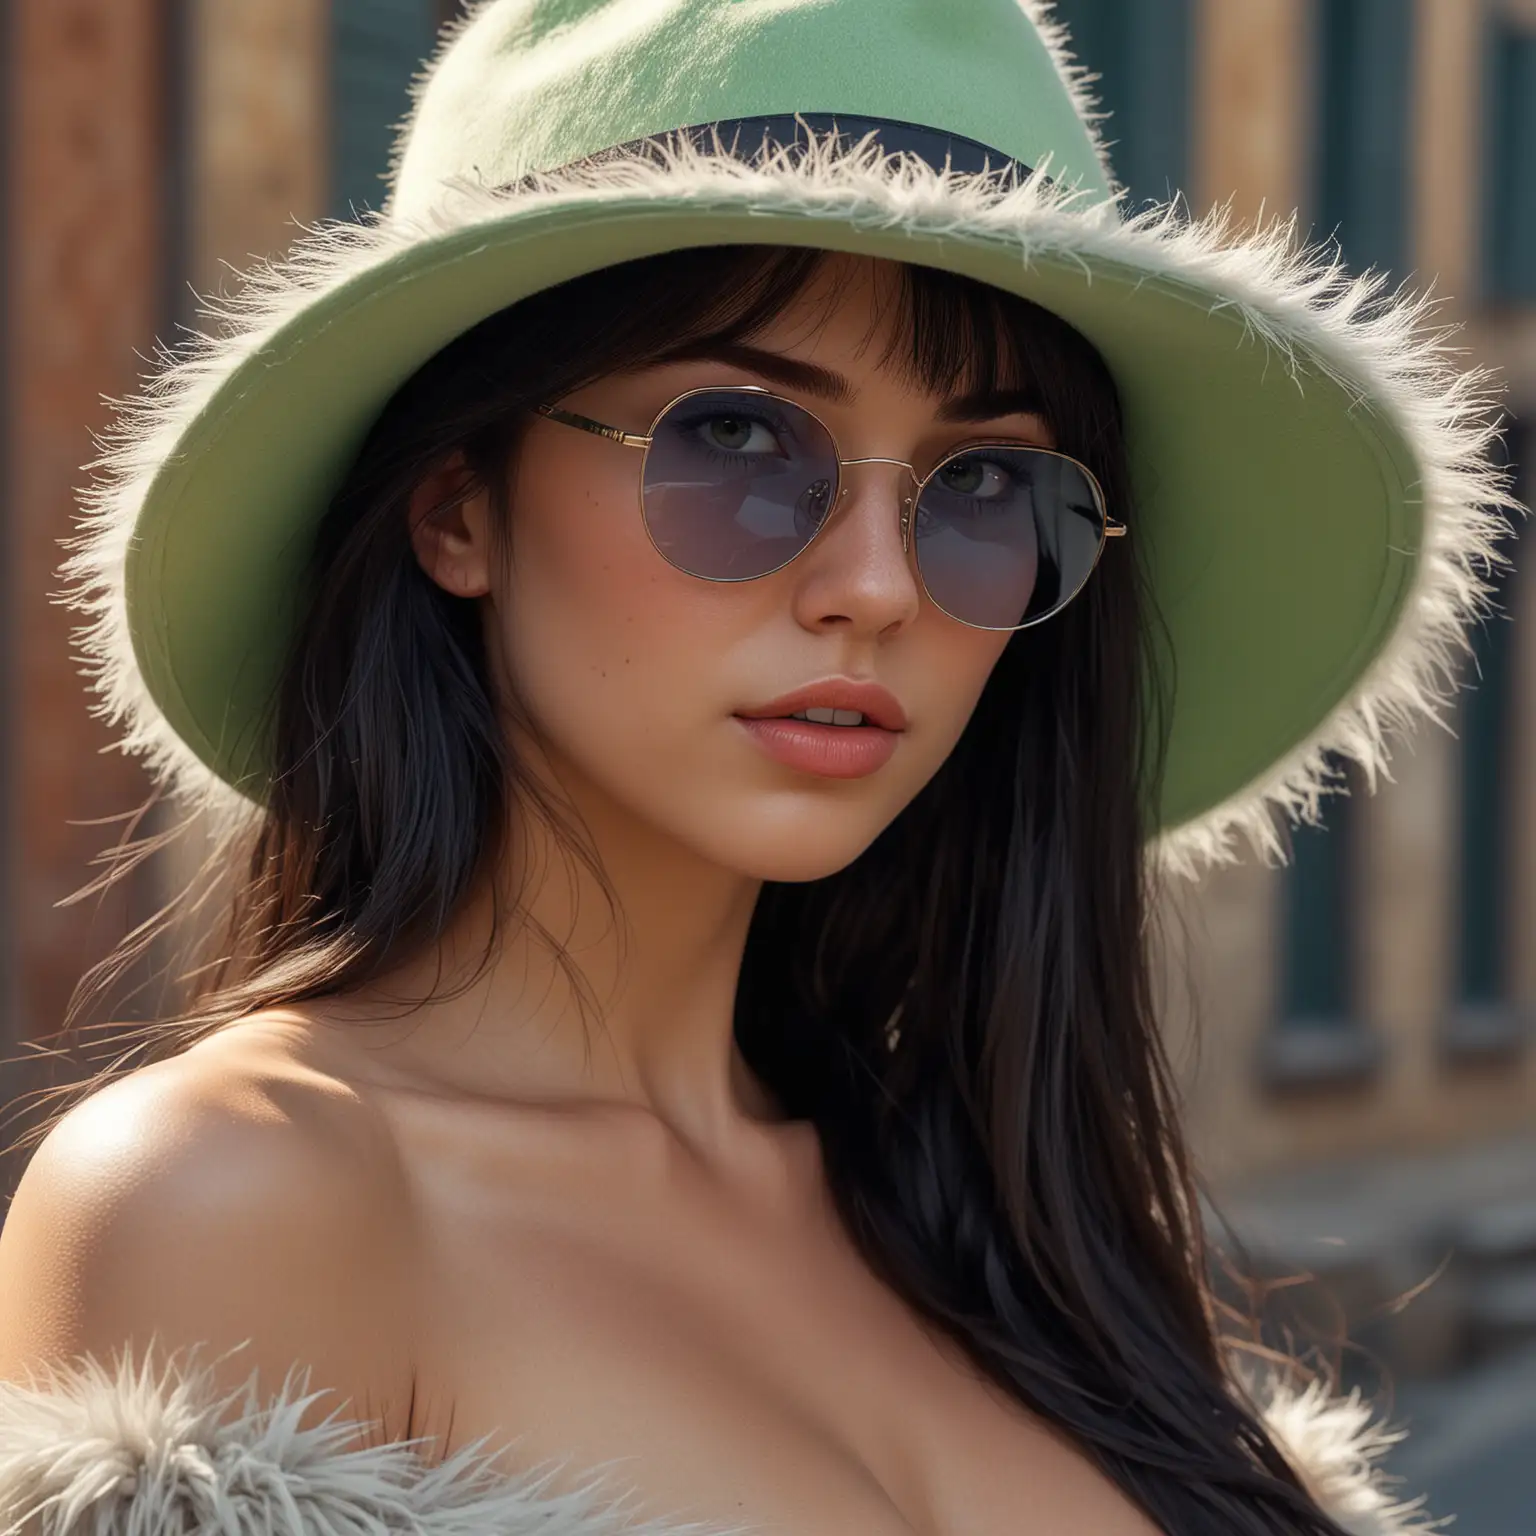 Exquisite Nordic Girl in Vintage Style with Rayben Sunglasses